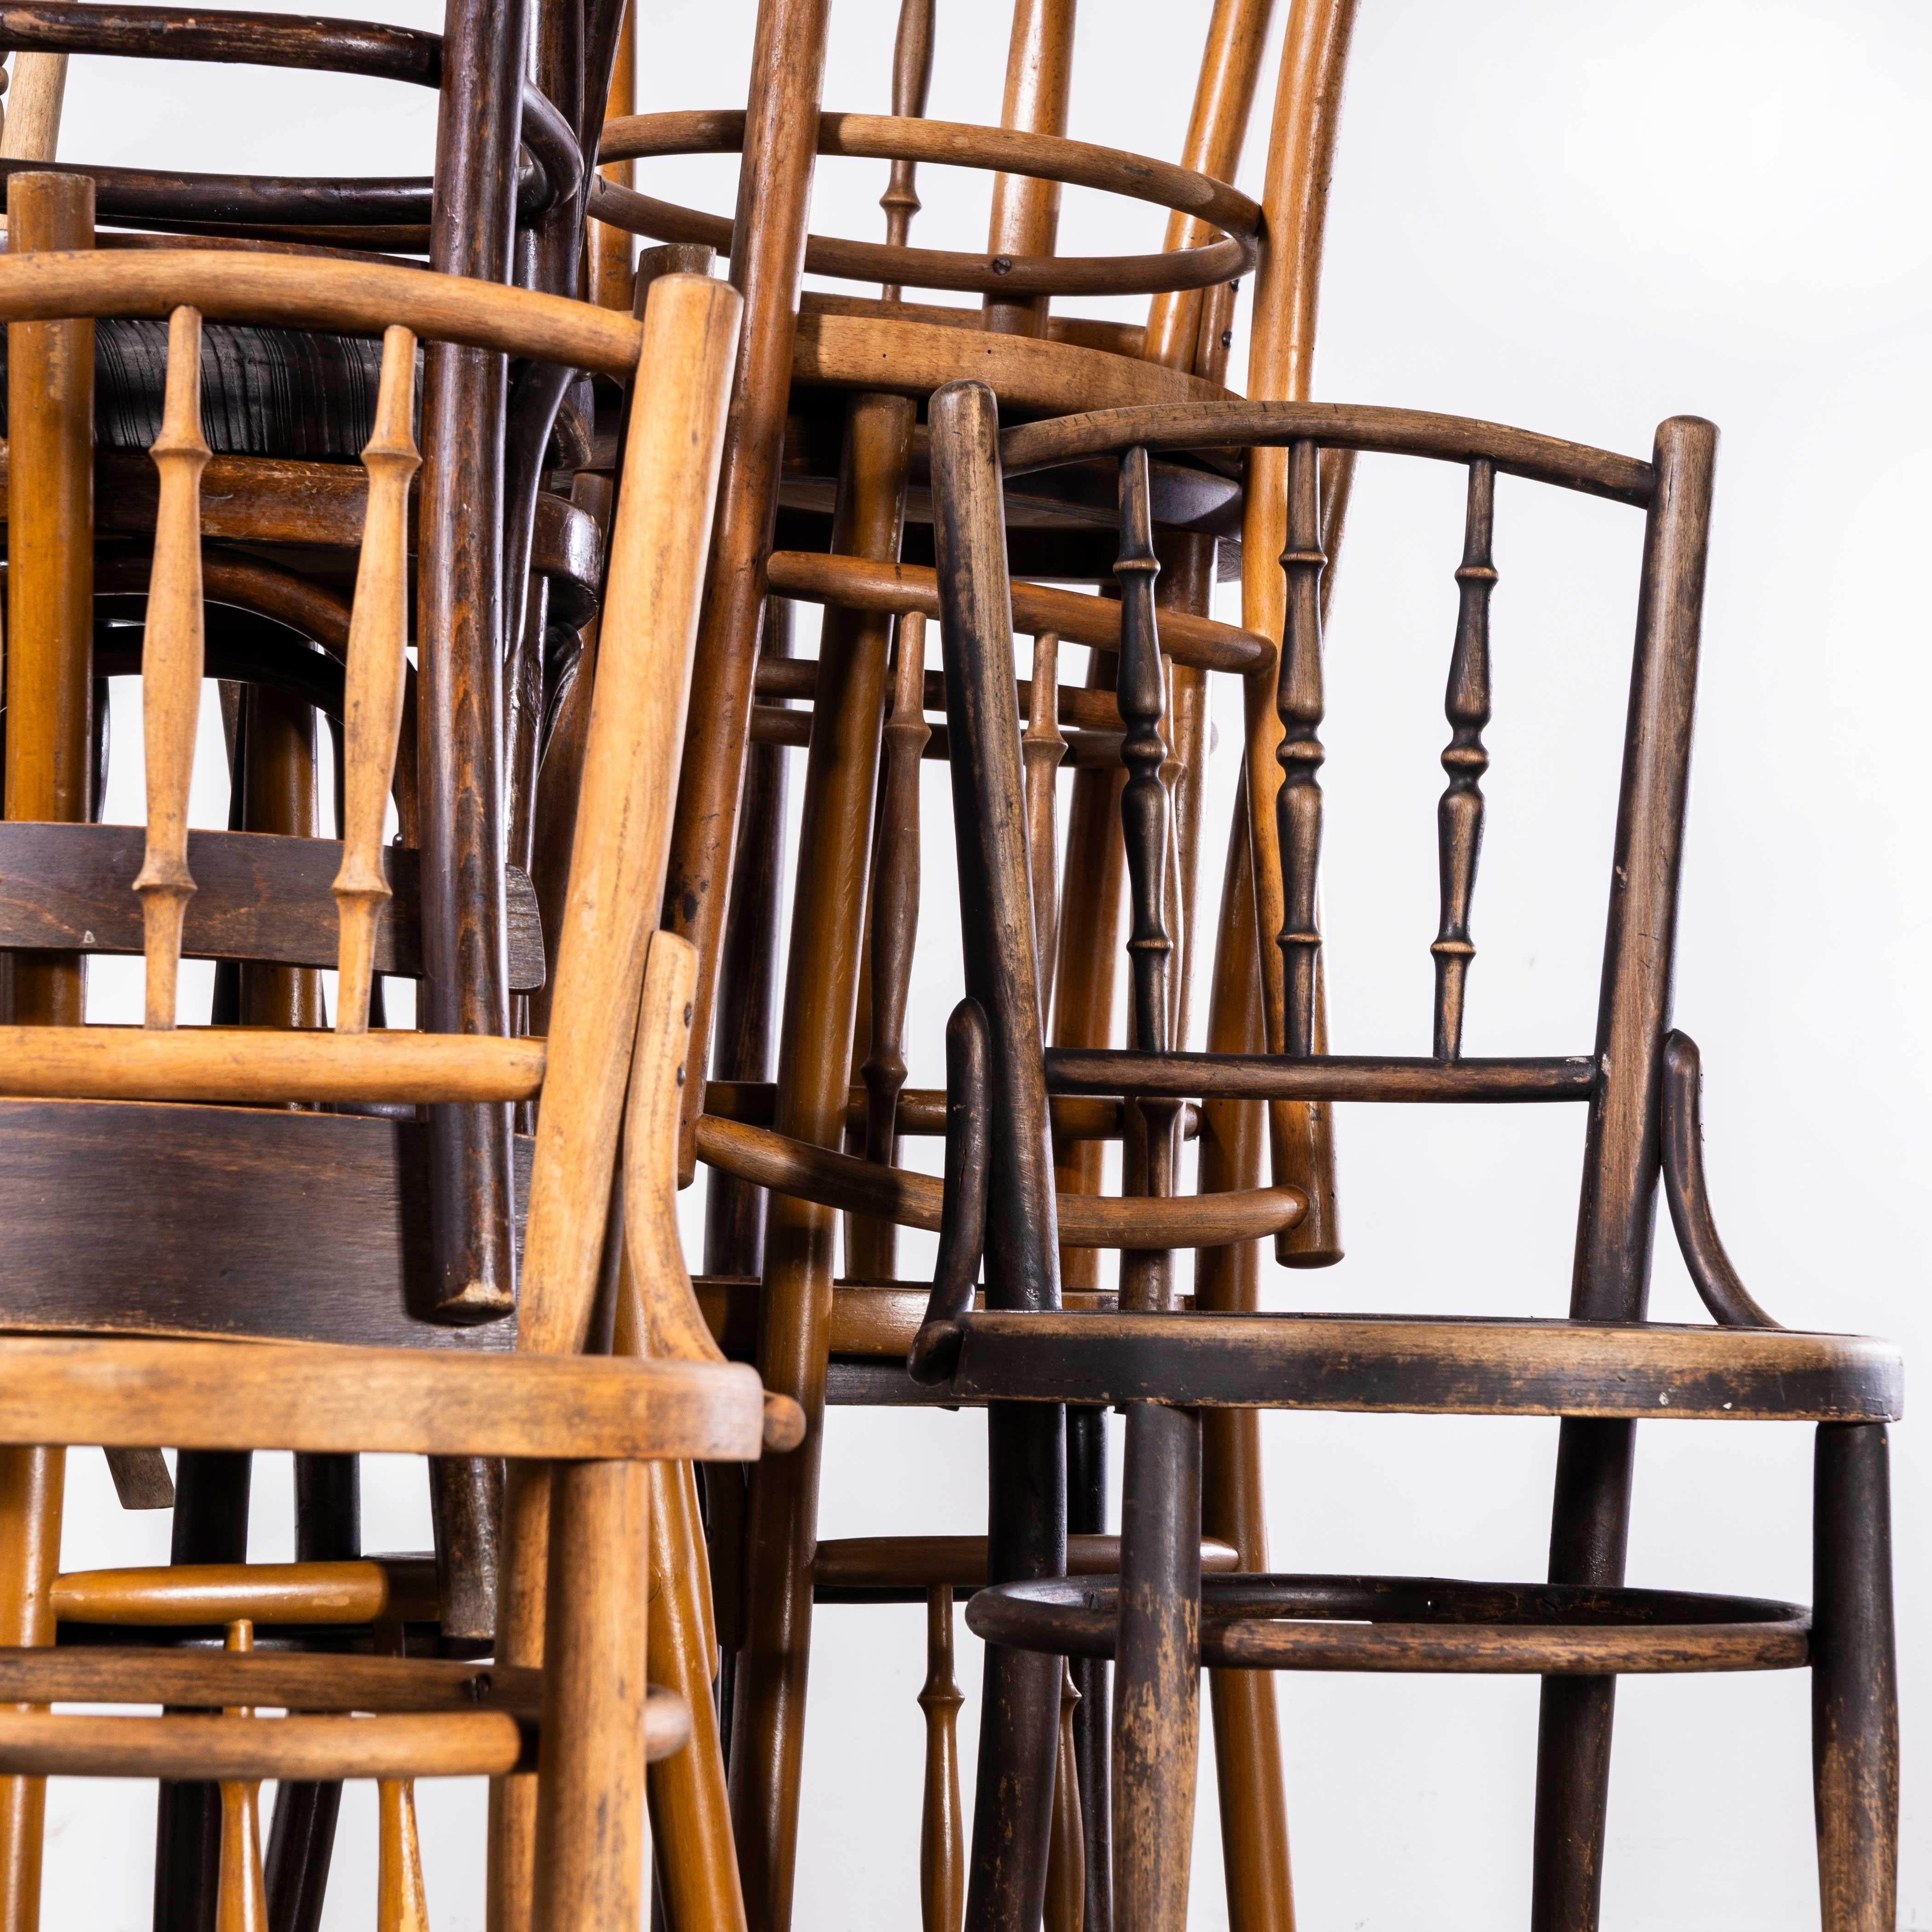 1940’s Bentwood Debrecen Spindle Back Dining Chairs – Mixed – Good Quantities Available
1940’s Bentwood Debrecen Spindle Back Dining Chairs – Mixed – Good Quantities Available. This listing is for a single chair with the option to select the